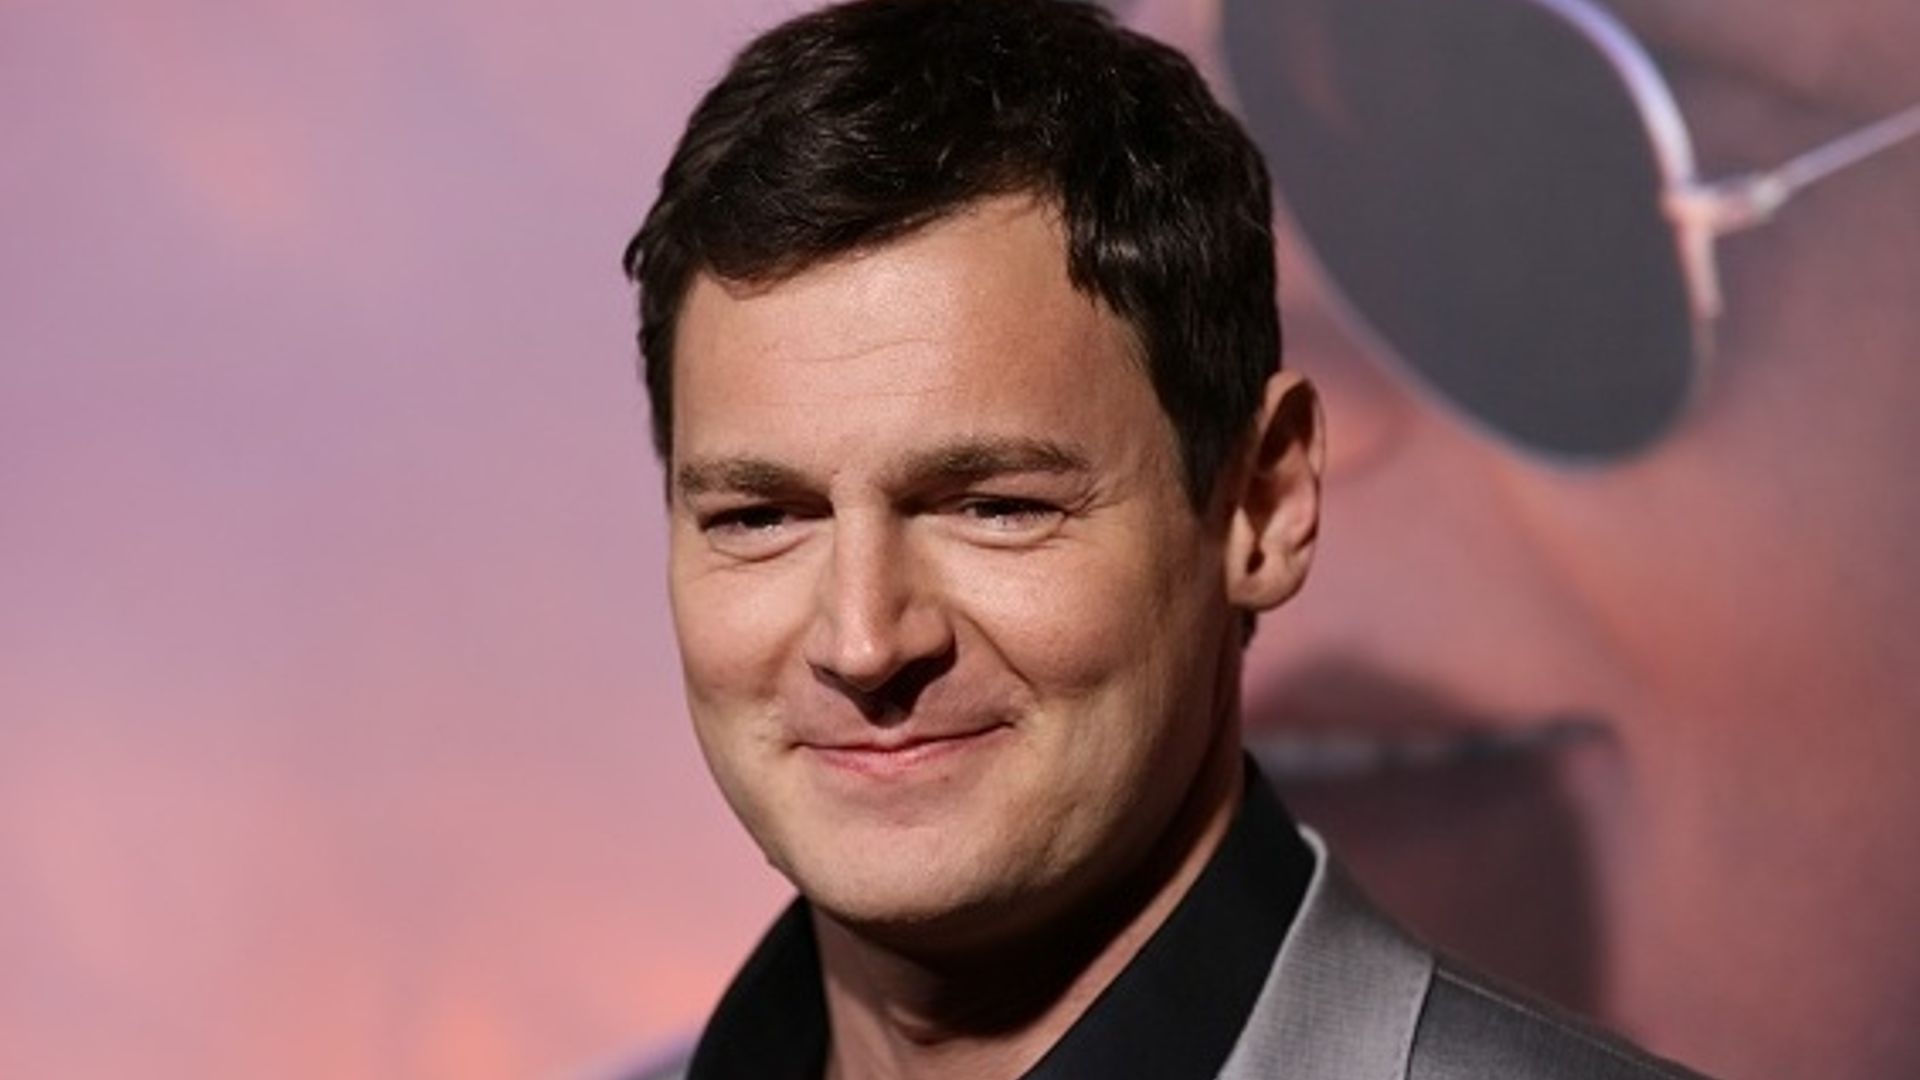 'The Choice' star Benjamin Walker on Tinder, falling in love and being a newlywed